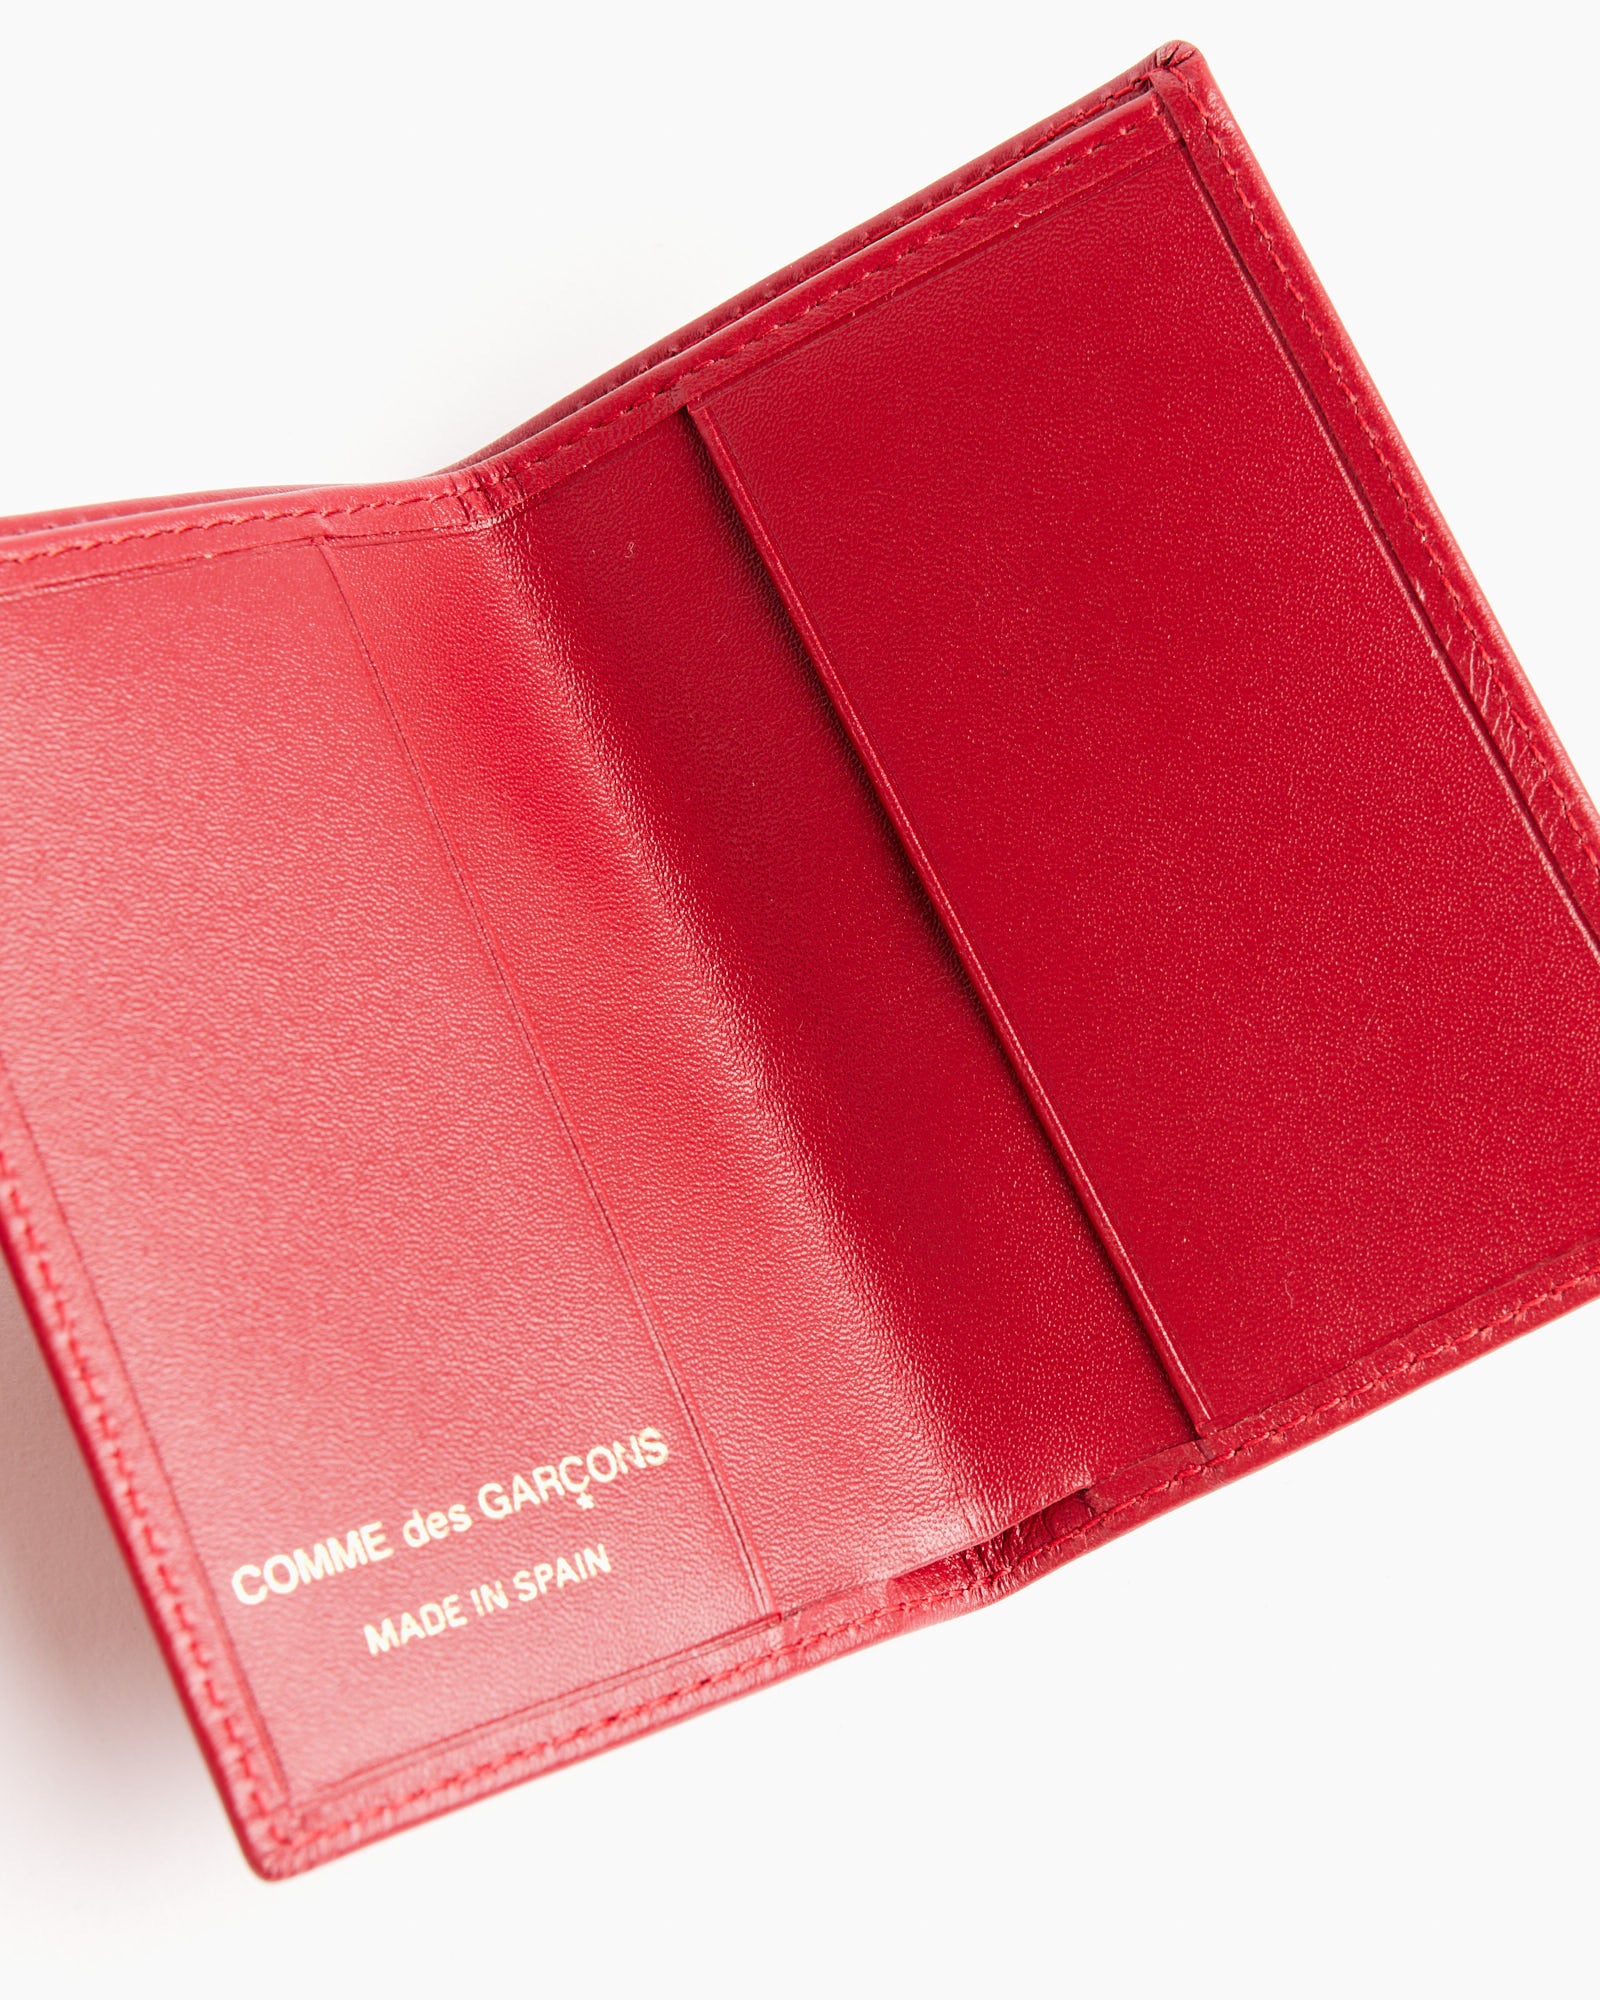 Classic Cardholder in Red